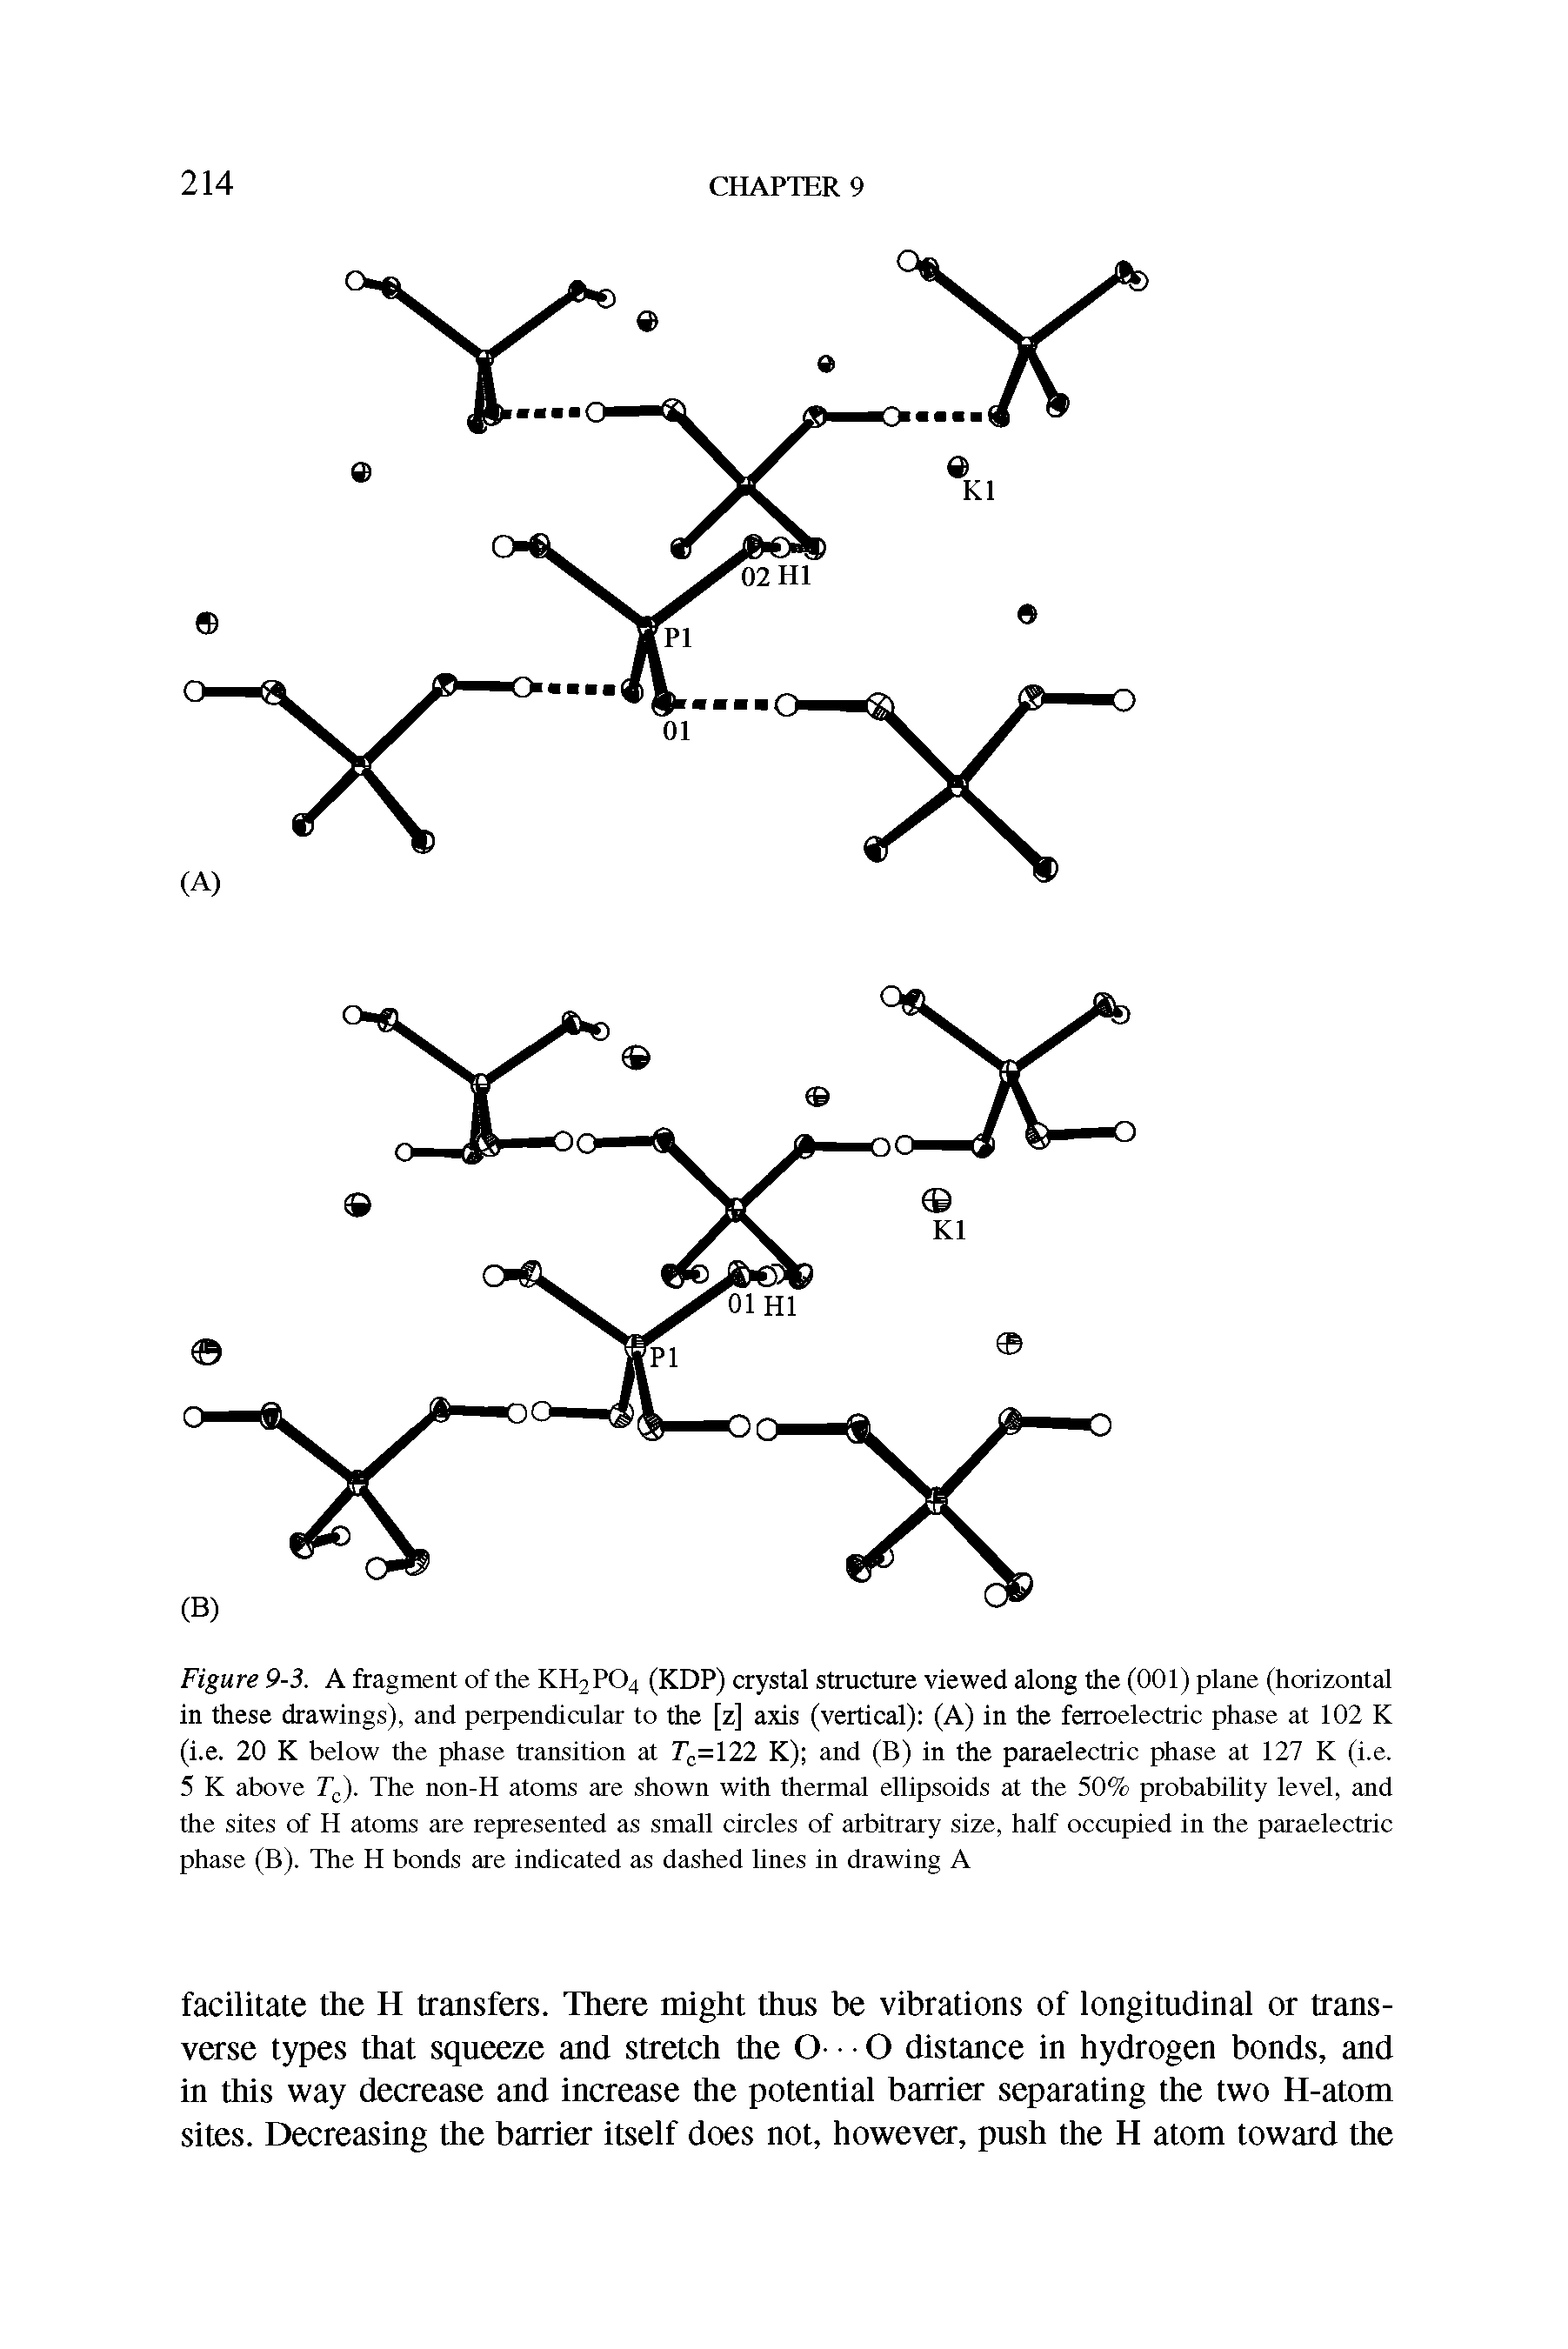 Figure 9-3. A fragment of the KH2PO4 (KDP) crystal structure viewed along the (001) plane (horizontal in these drawings), and perpendicular to the [z] axis (vertical) (A) in the ferroelectric phase at 102 K (i.e. 20 K below the phase transition at 7 =122 K) and (B) in the paraelectric phase at 127 K (i.e. 5 K above T ). The non-H atoms are shown with thermal ellipsoids at the 50% probability level, and the sites of H atoms are represented as small circles of arbitrary size, half occupied in the paraelectric phase (B). The H bonds are indicated as dashed lines in drawing A...